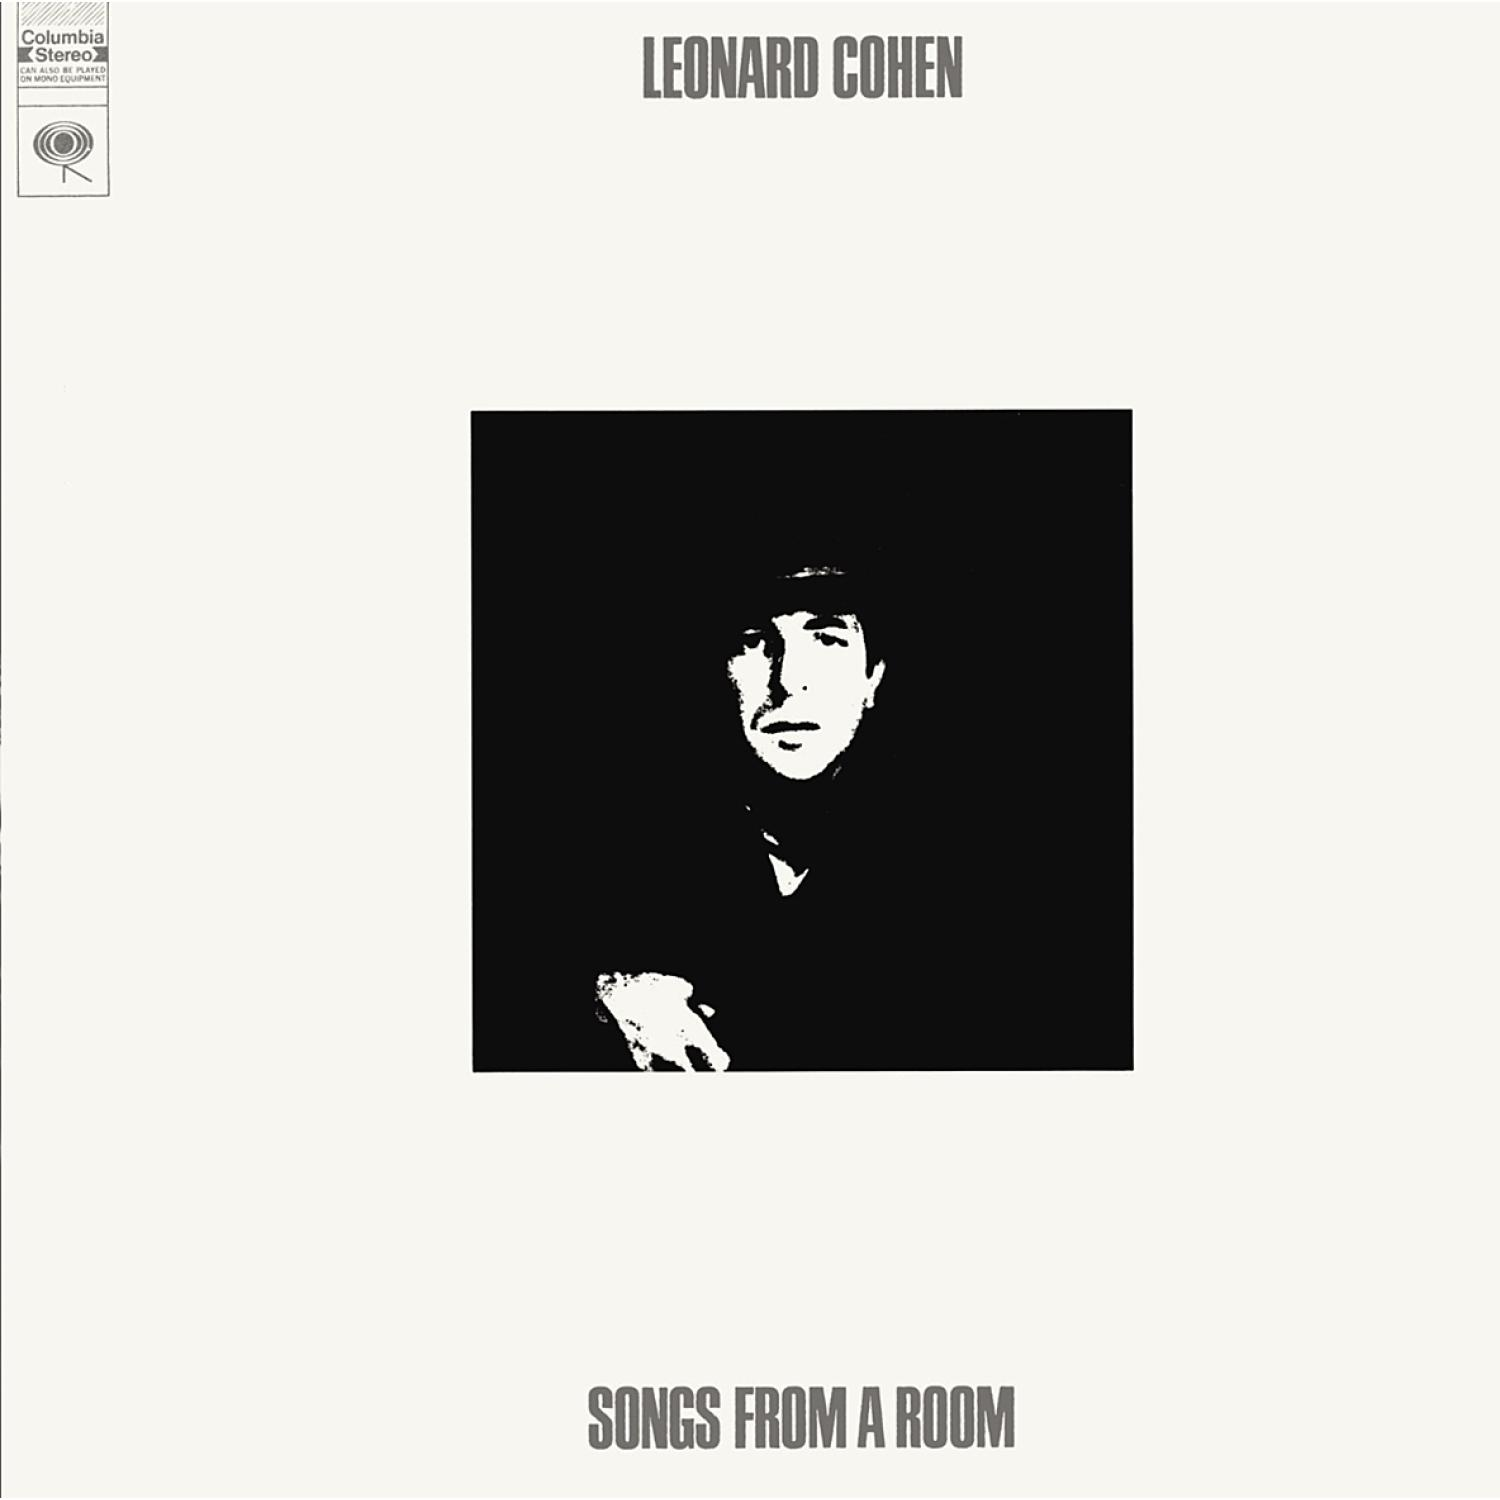 Cohen ROOM SONGS A FROM - - Leonard (CD)